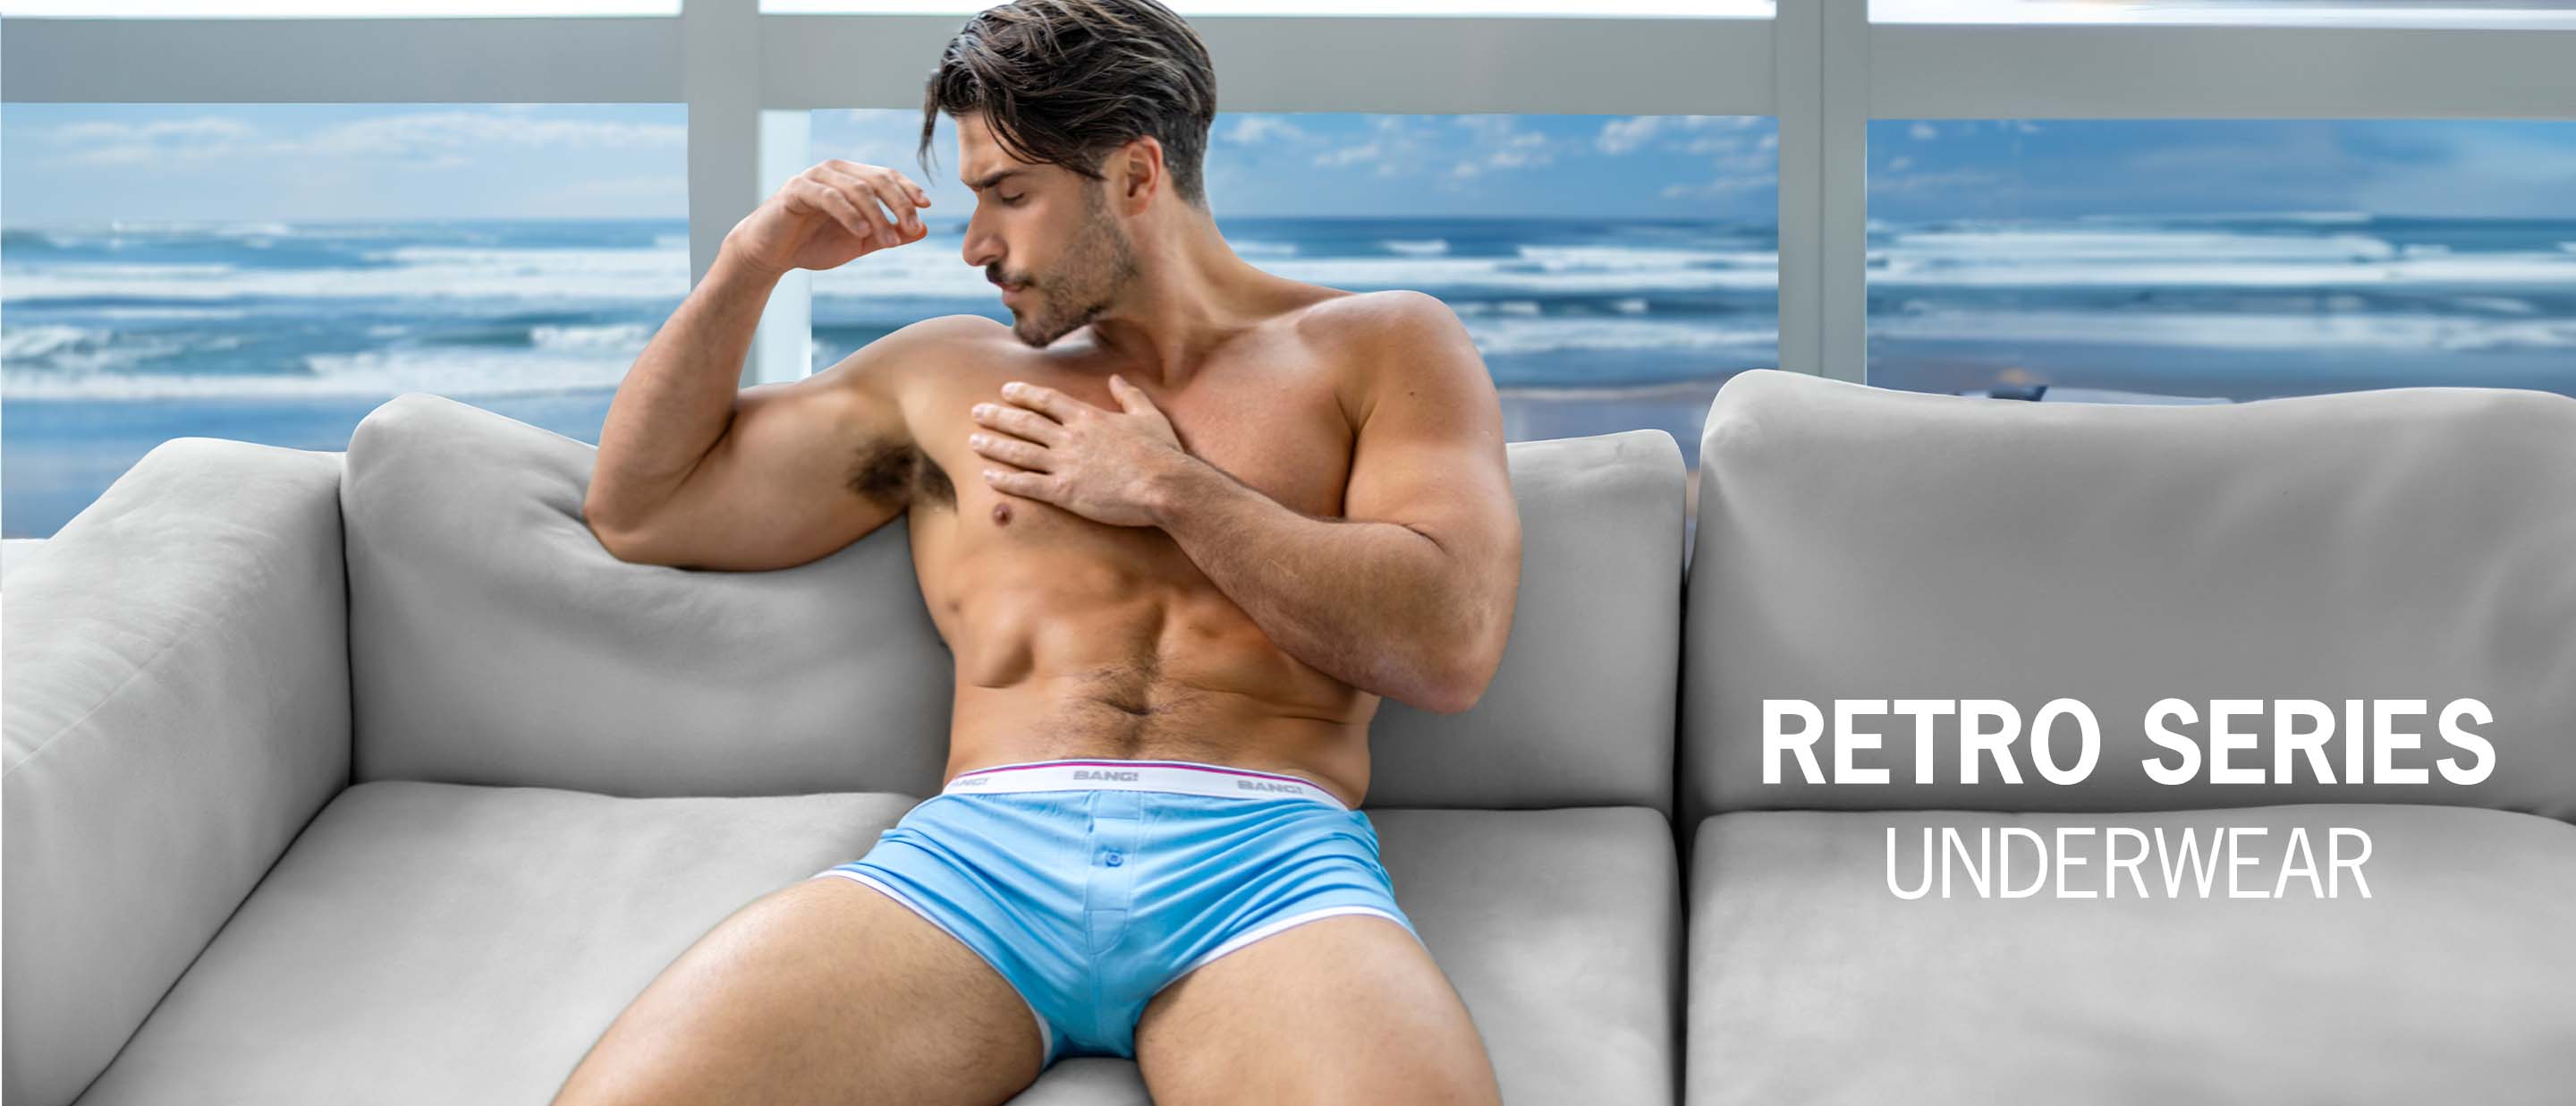 The new RETRO Series of Men's underwear by BANG! Miami. Featuring vintage and nostalgic patterns inspired on timeless cuts of men's underwear.  Classic silhouettes of men's briefs and boxer briefs, reimagined as new pieces of undies for men that fit as modern as sexy.